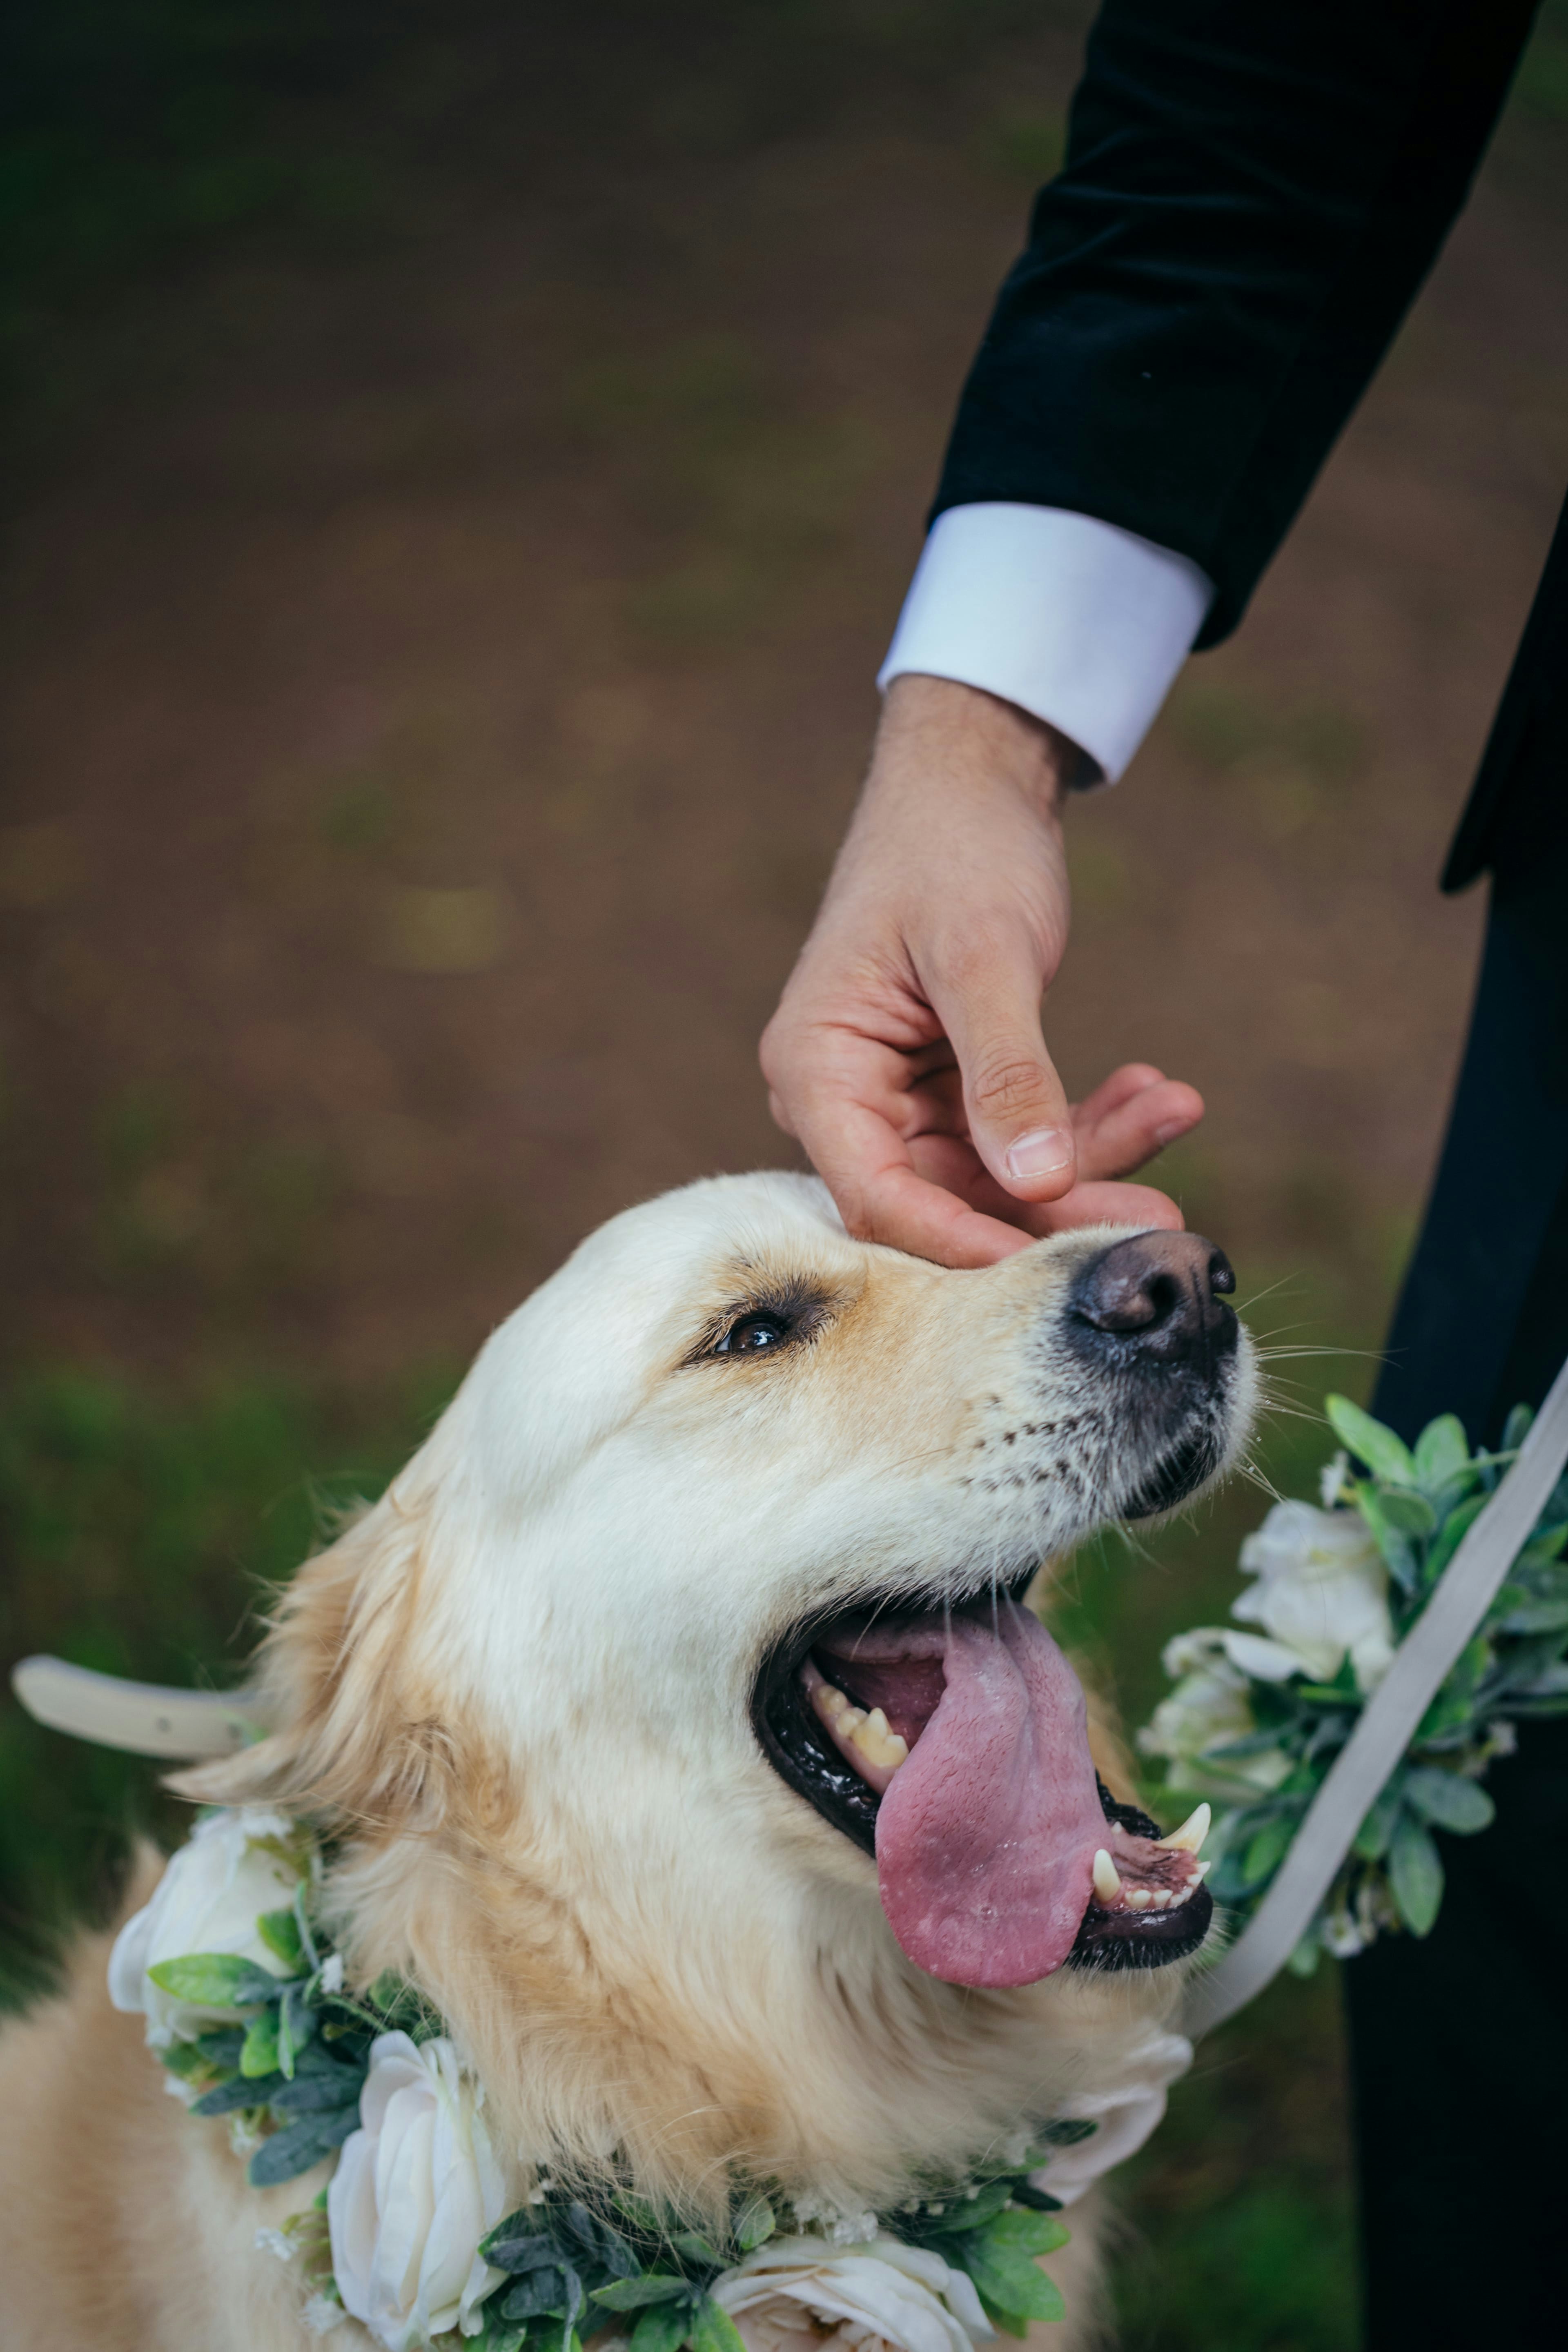 Groom pats dog while it licks its mouth